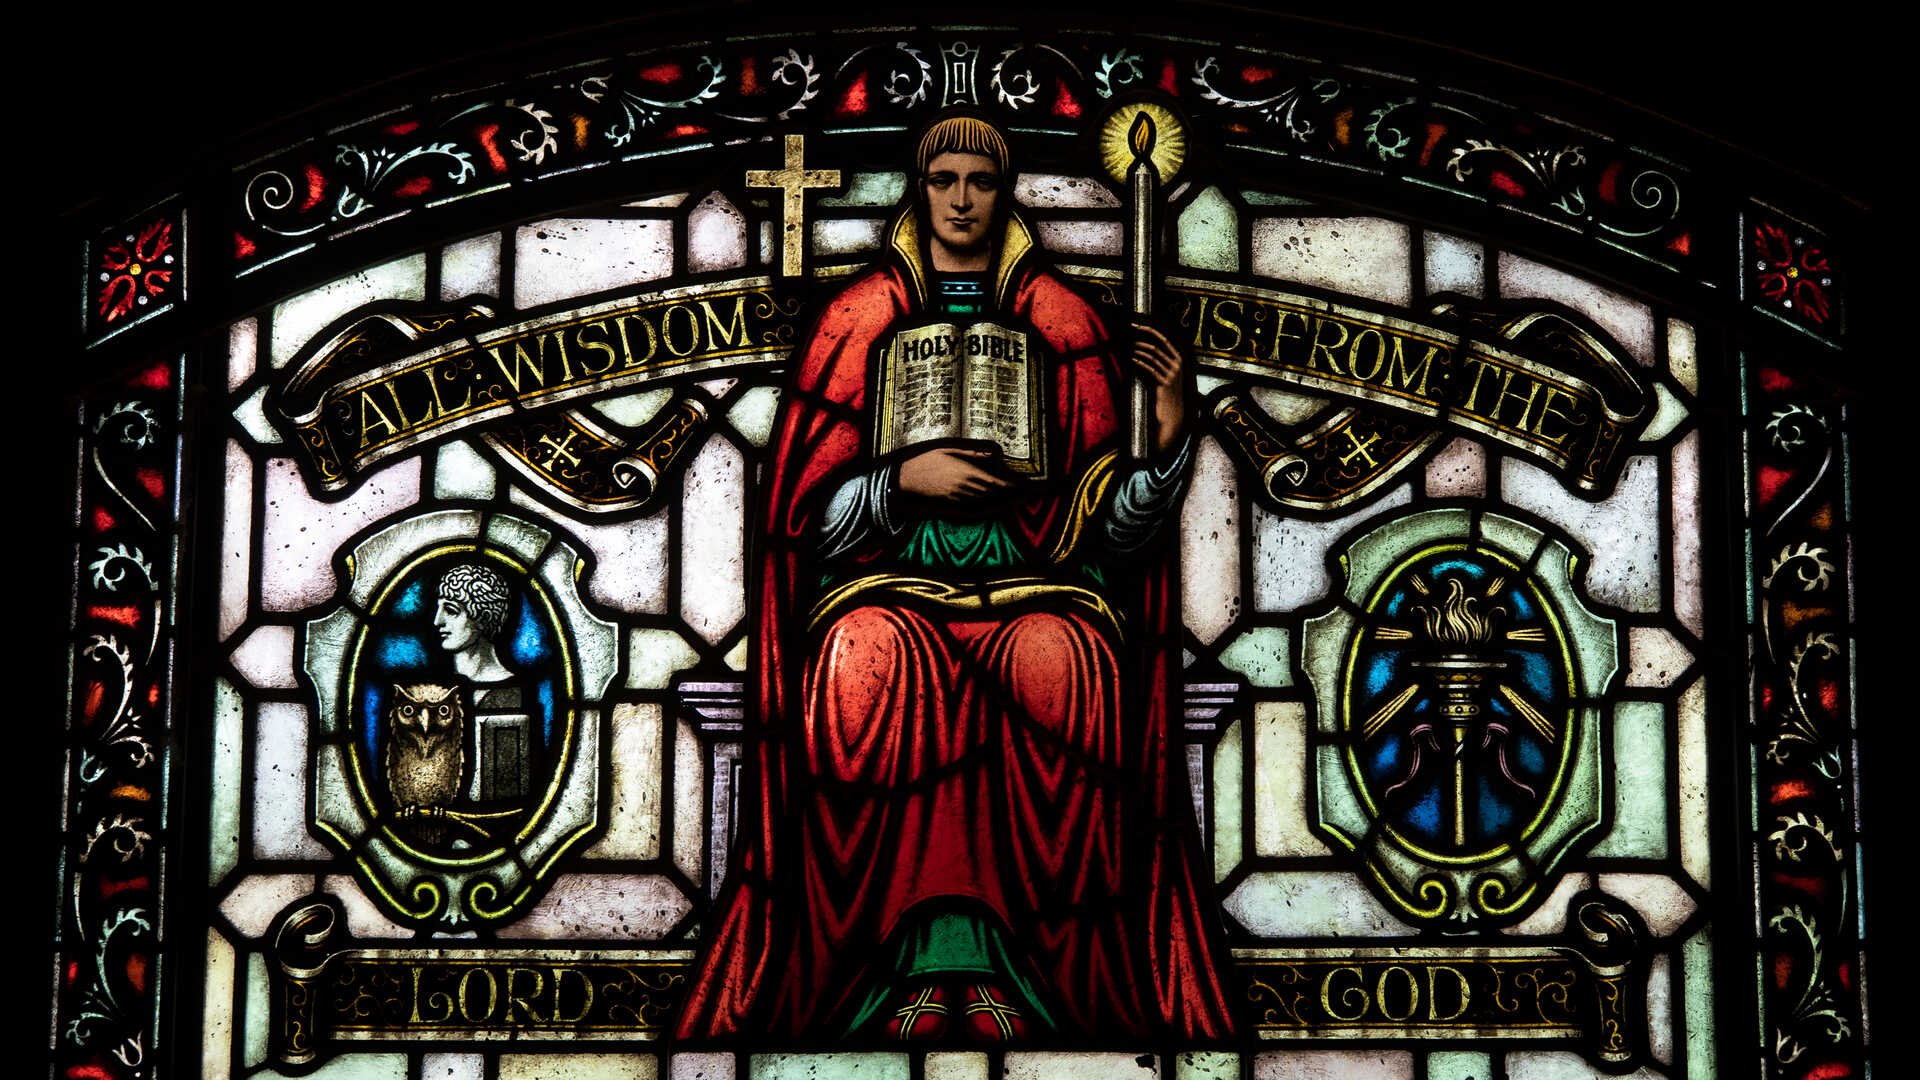 Stained glass window in Aquinas Chapel